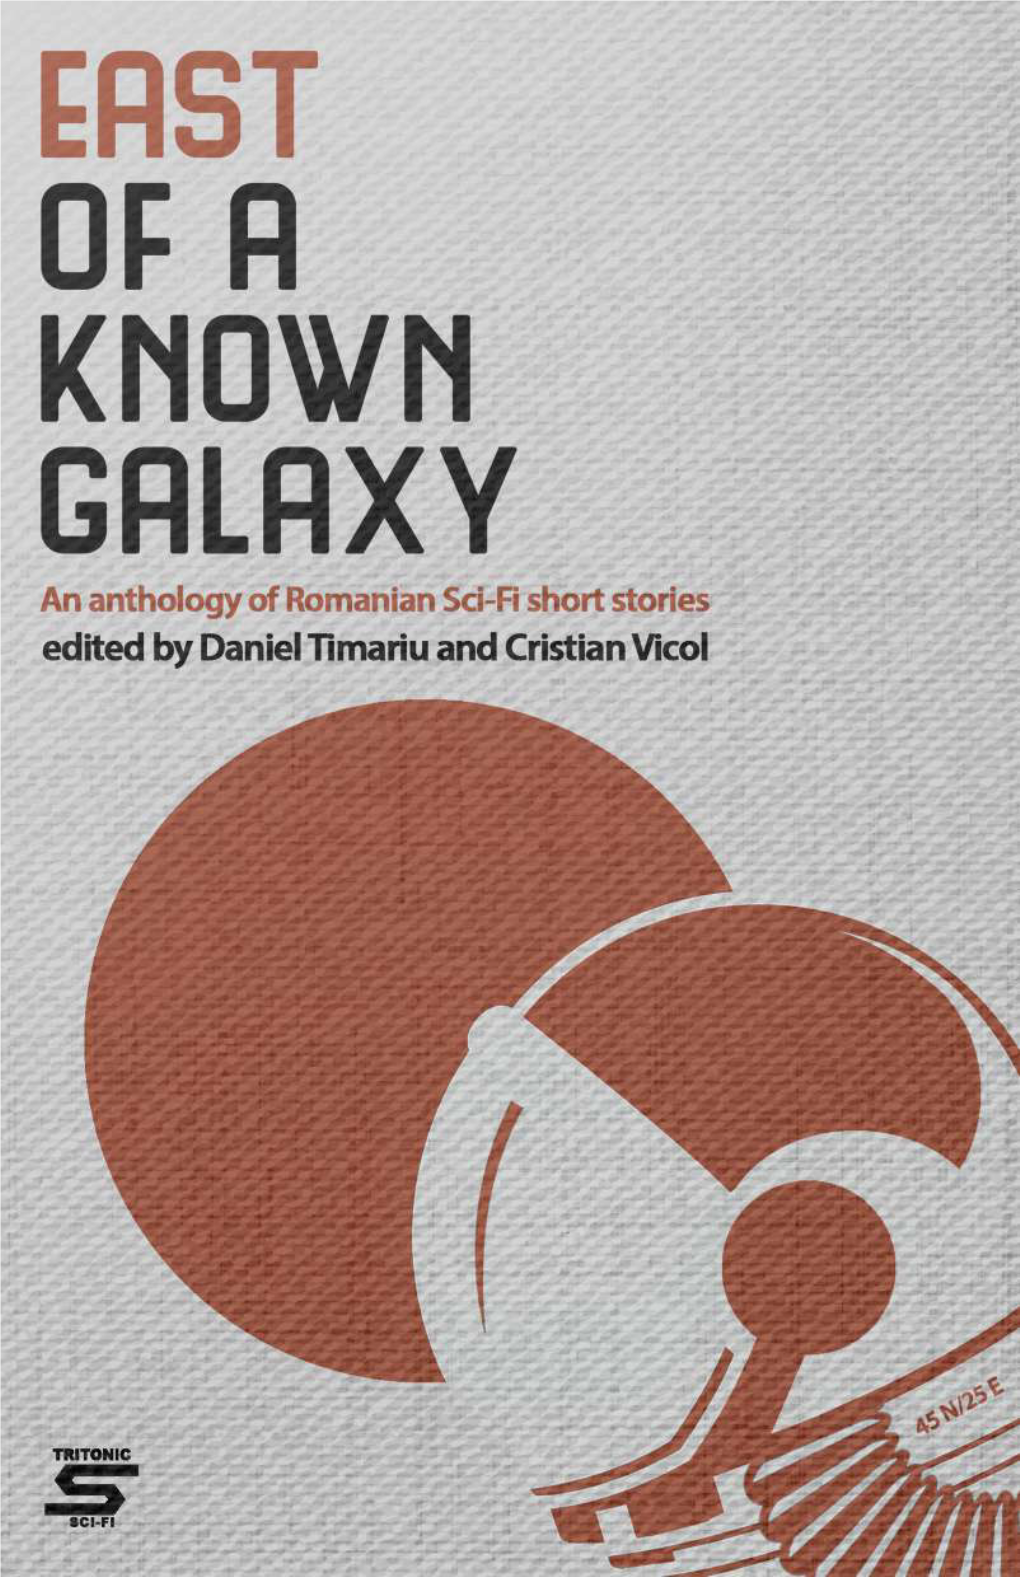 East-Of-A-Known-Galaxy-PDF-FINAL2